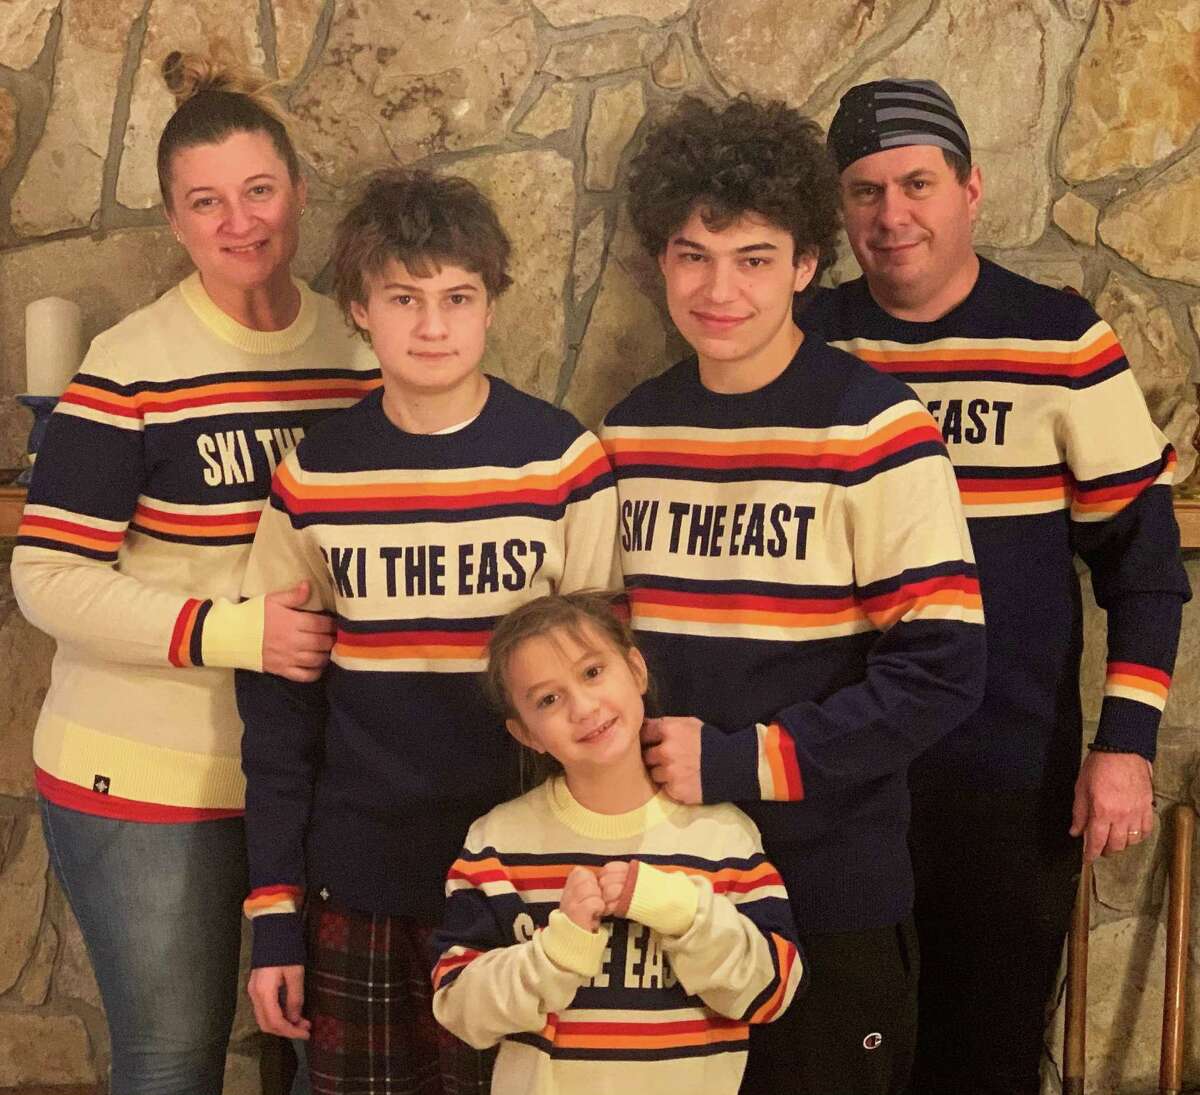 The Forchielli familyfrom left, Danee, Nicholas, Tyler, James and Evie in the front. The family of skiers were at Mount Snow in Vermont in 2020.